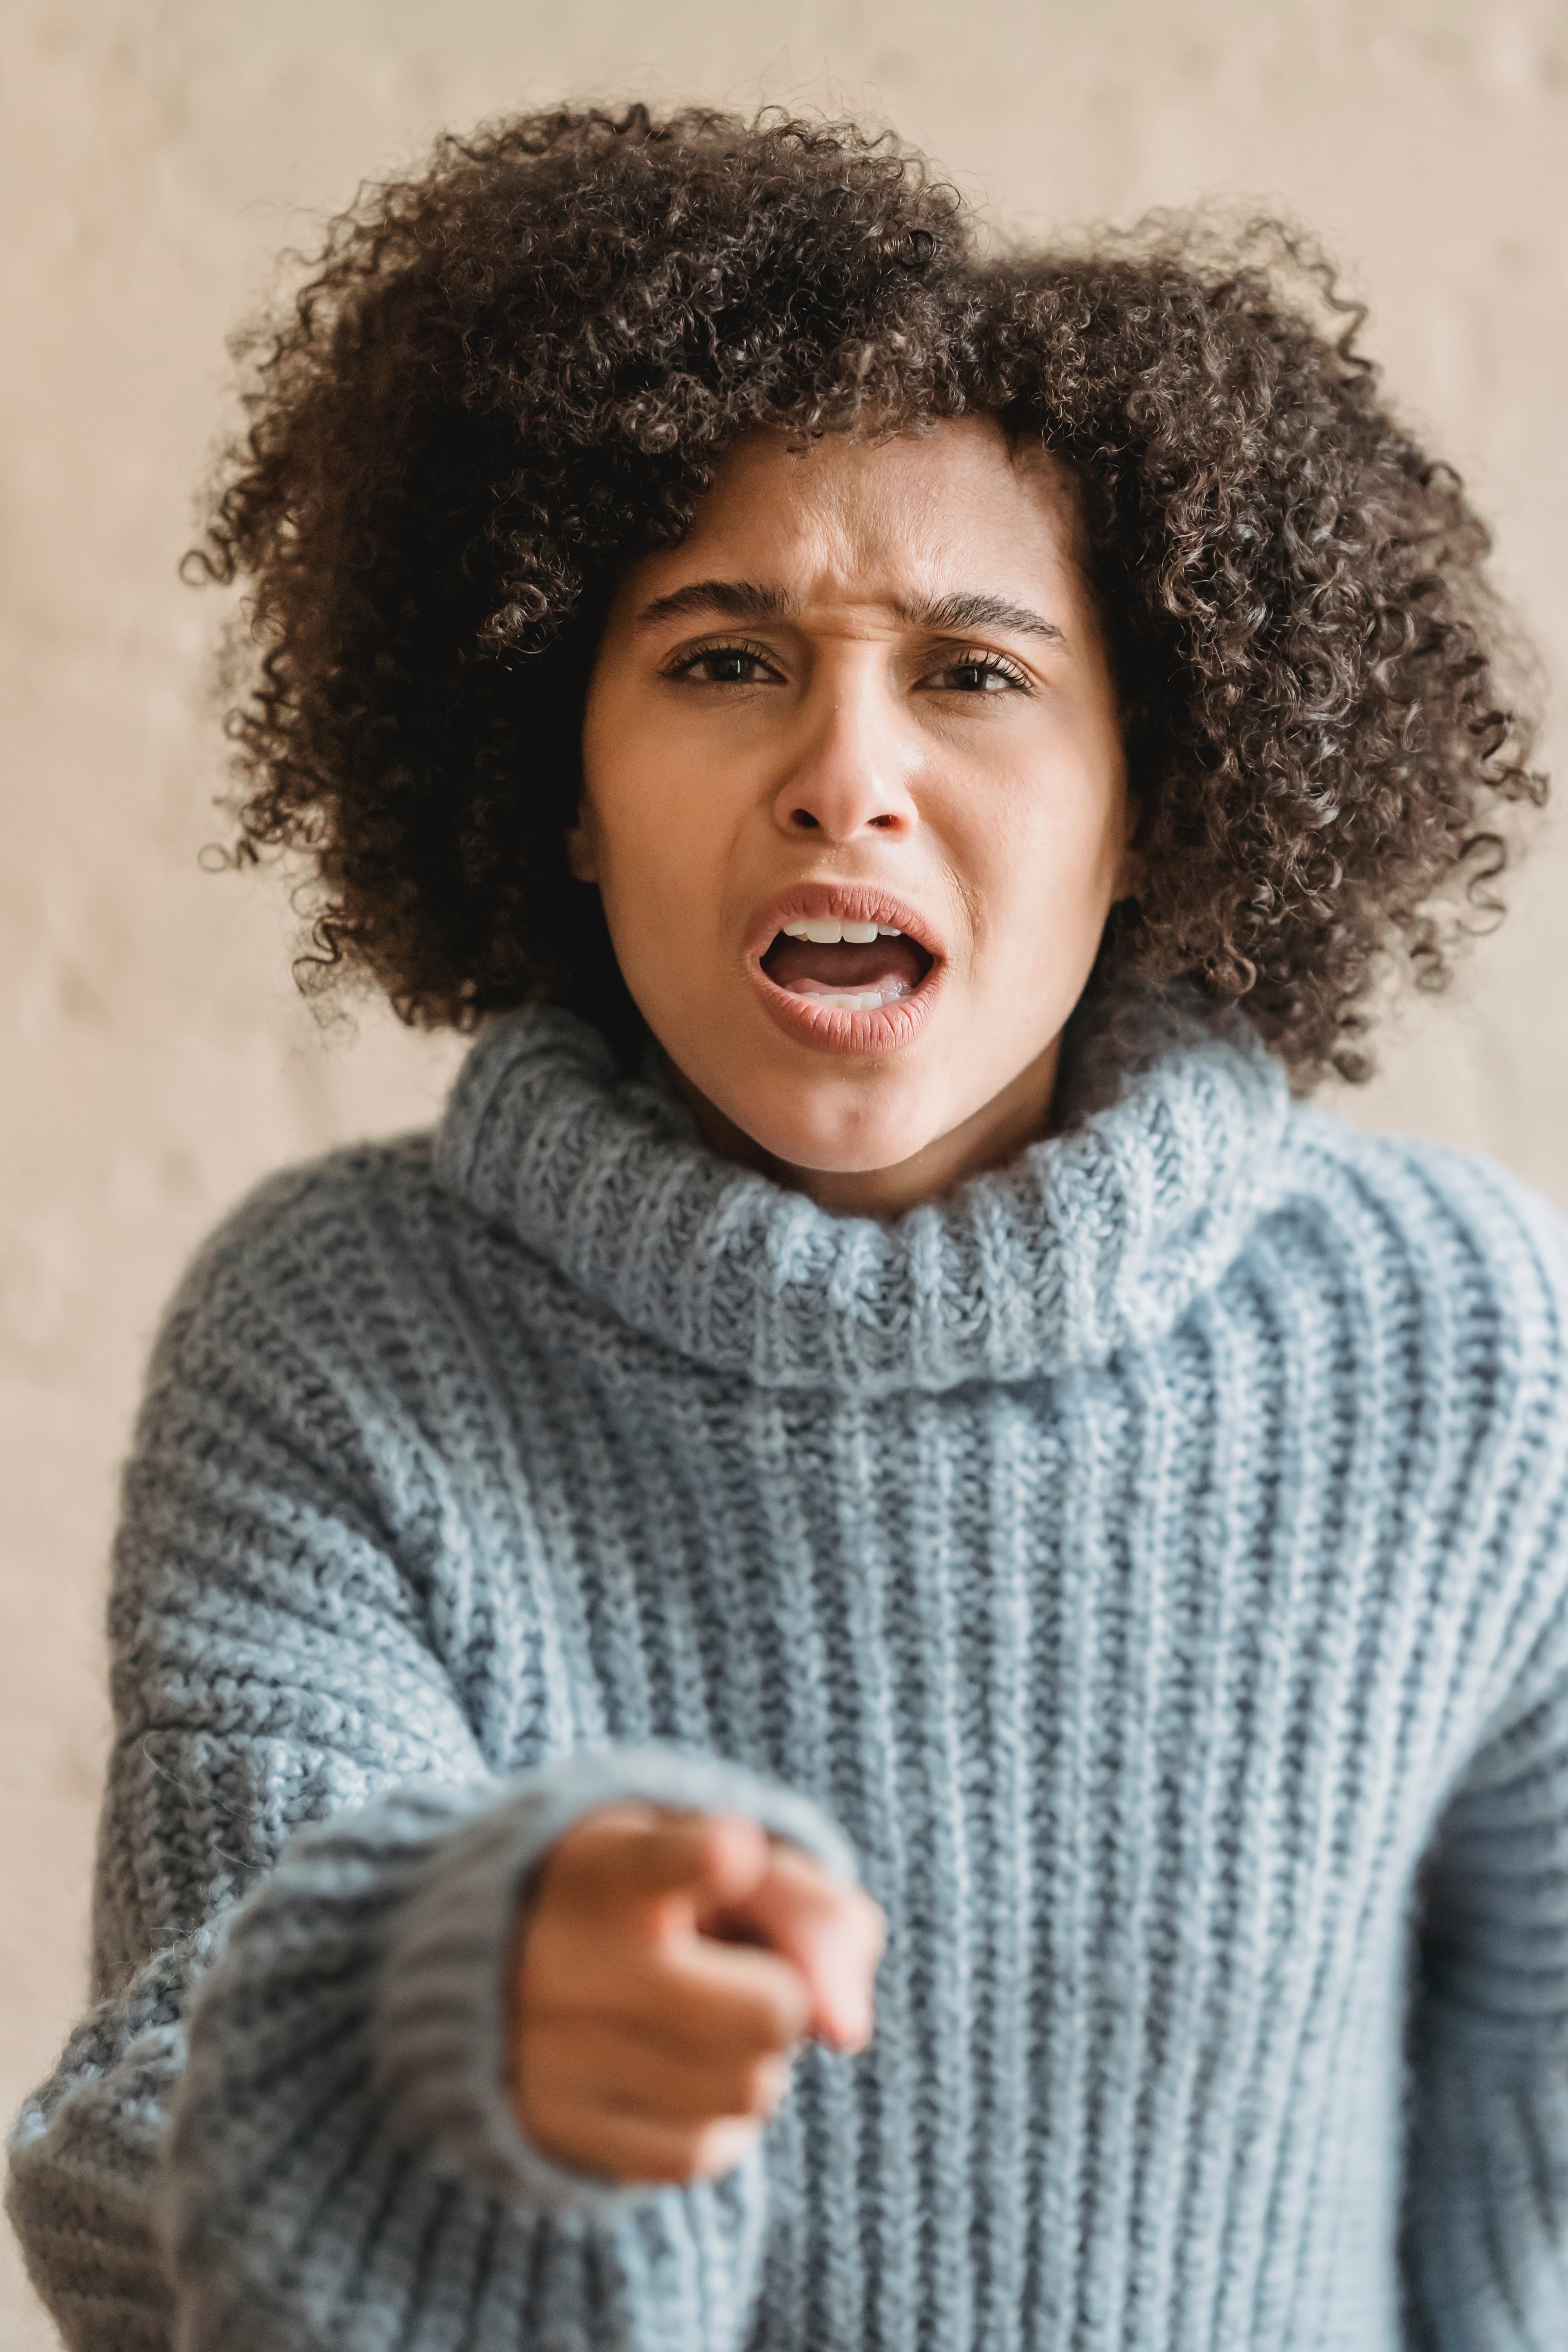 An angry woman. | Source: Pexels